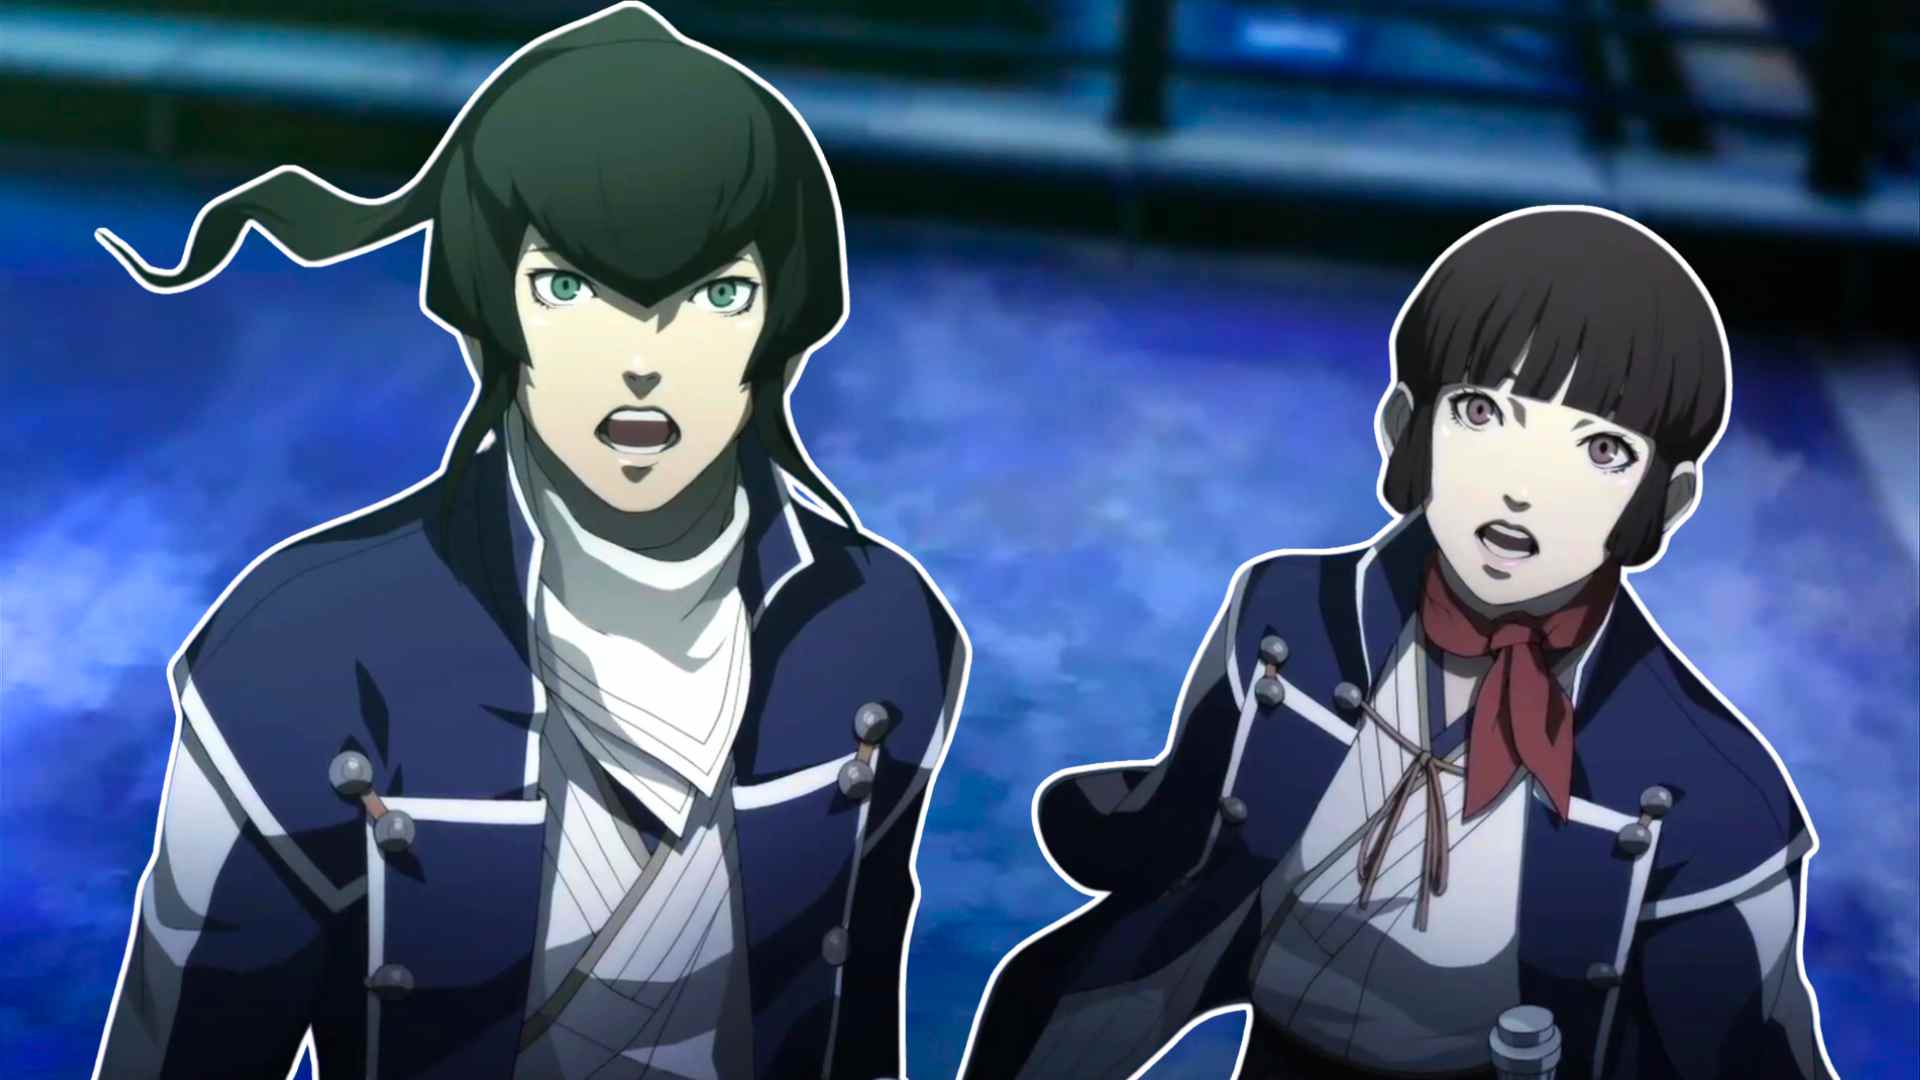 Even in 2013, Atlus released day one DLC with SMT 4.